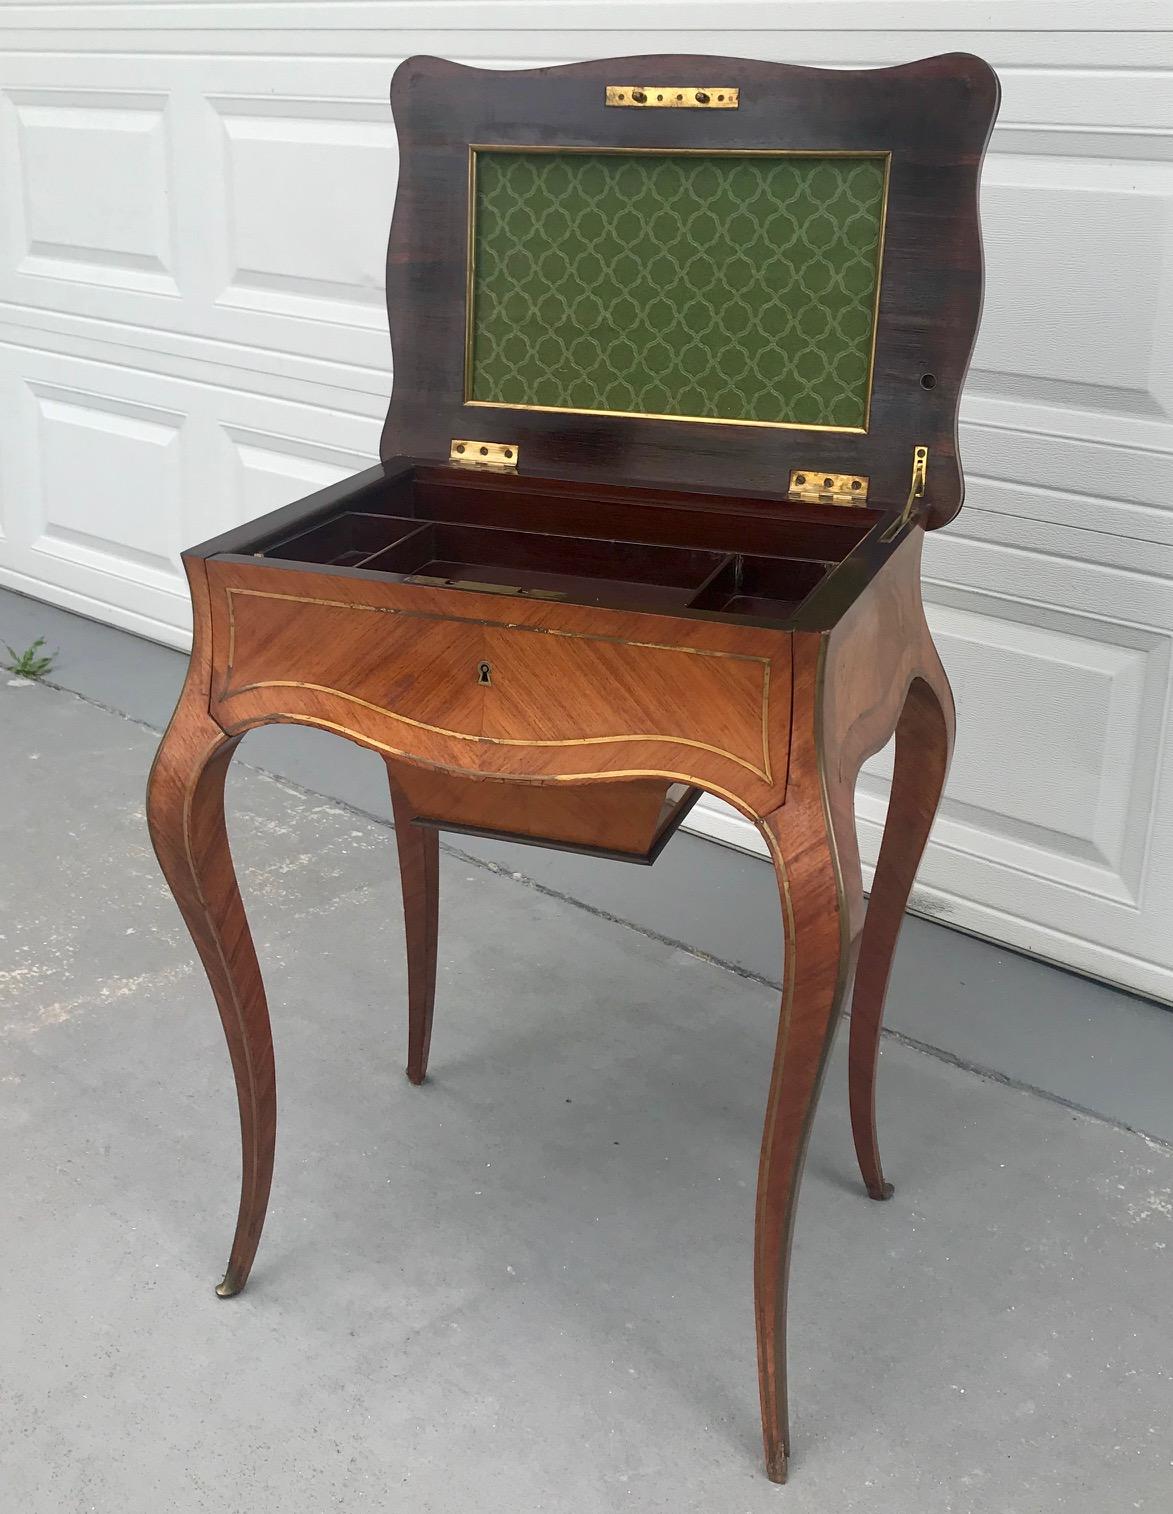 19th century Louis XV style tulipwood parquetry sewing table

Ladies small sewing table with a lift-up lid. The interior has the original velvet inset. Beneath is a tray containing compartments for sewing accessories. The base is fitted with a